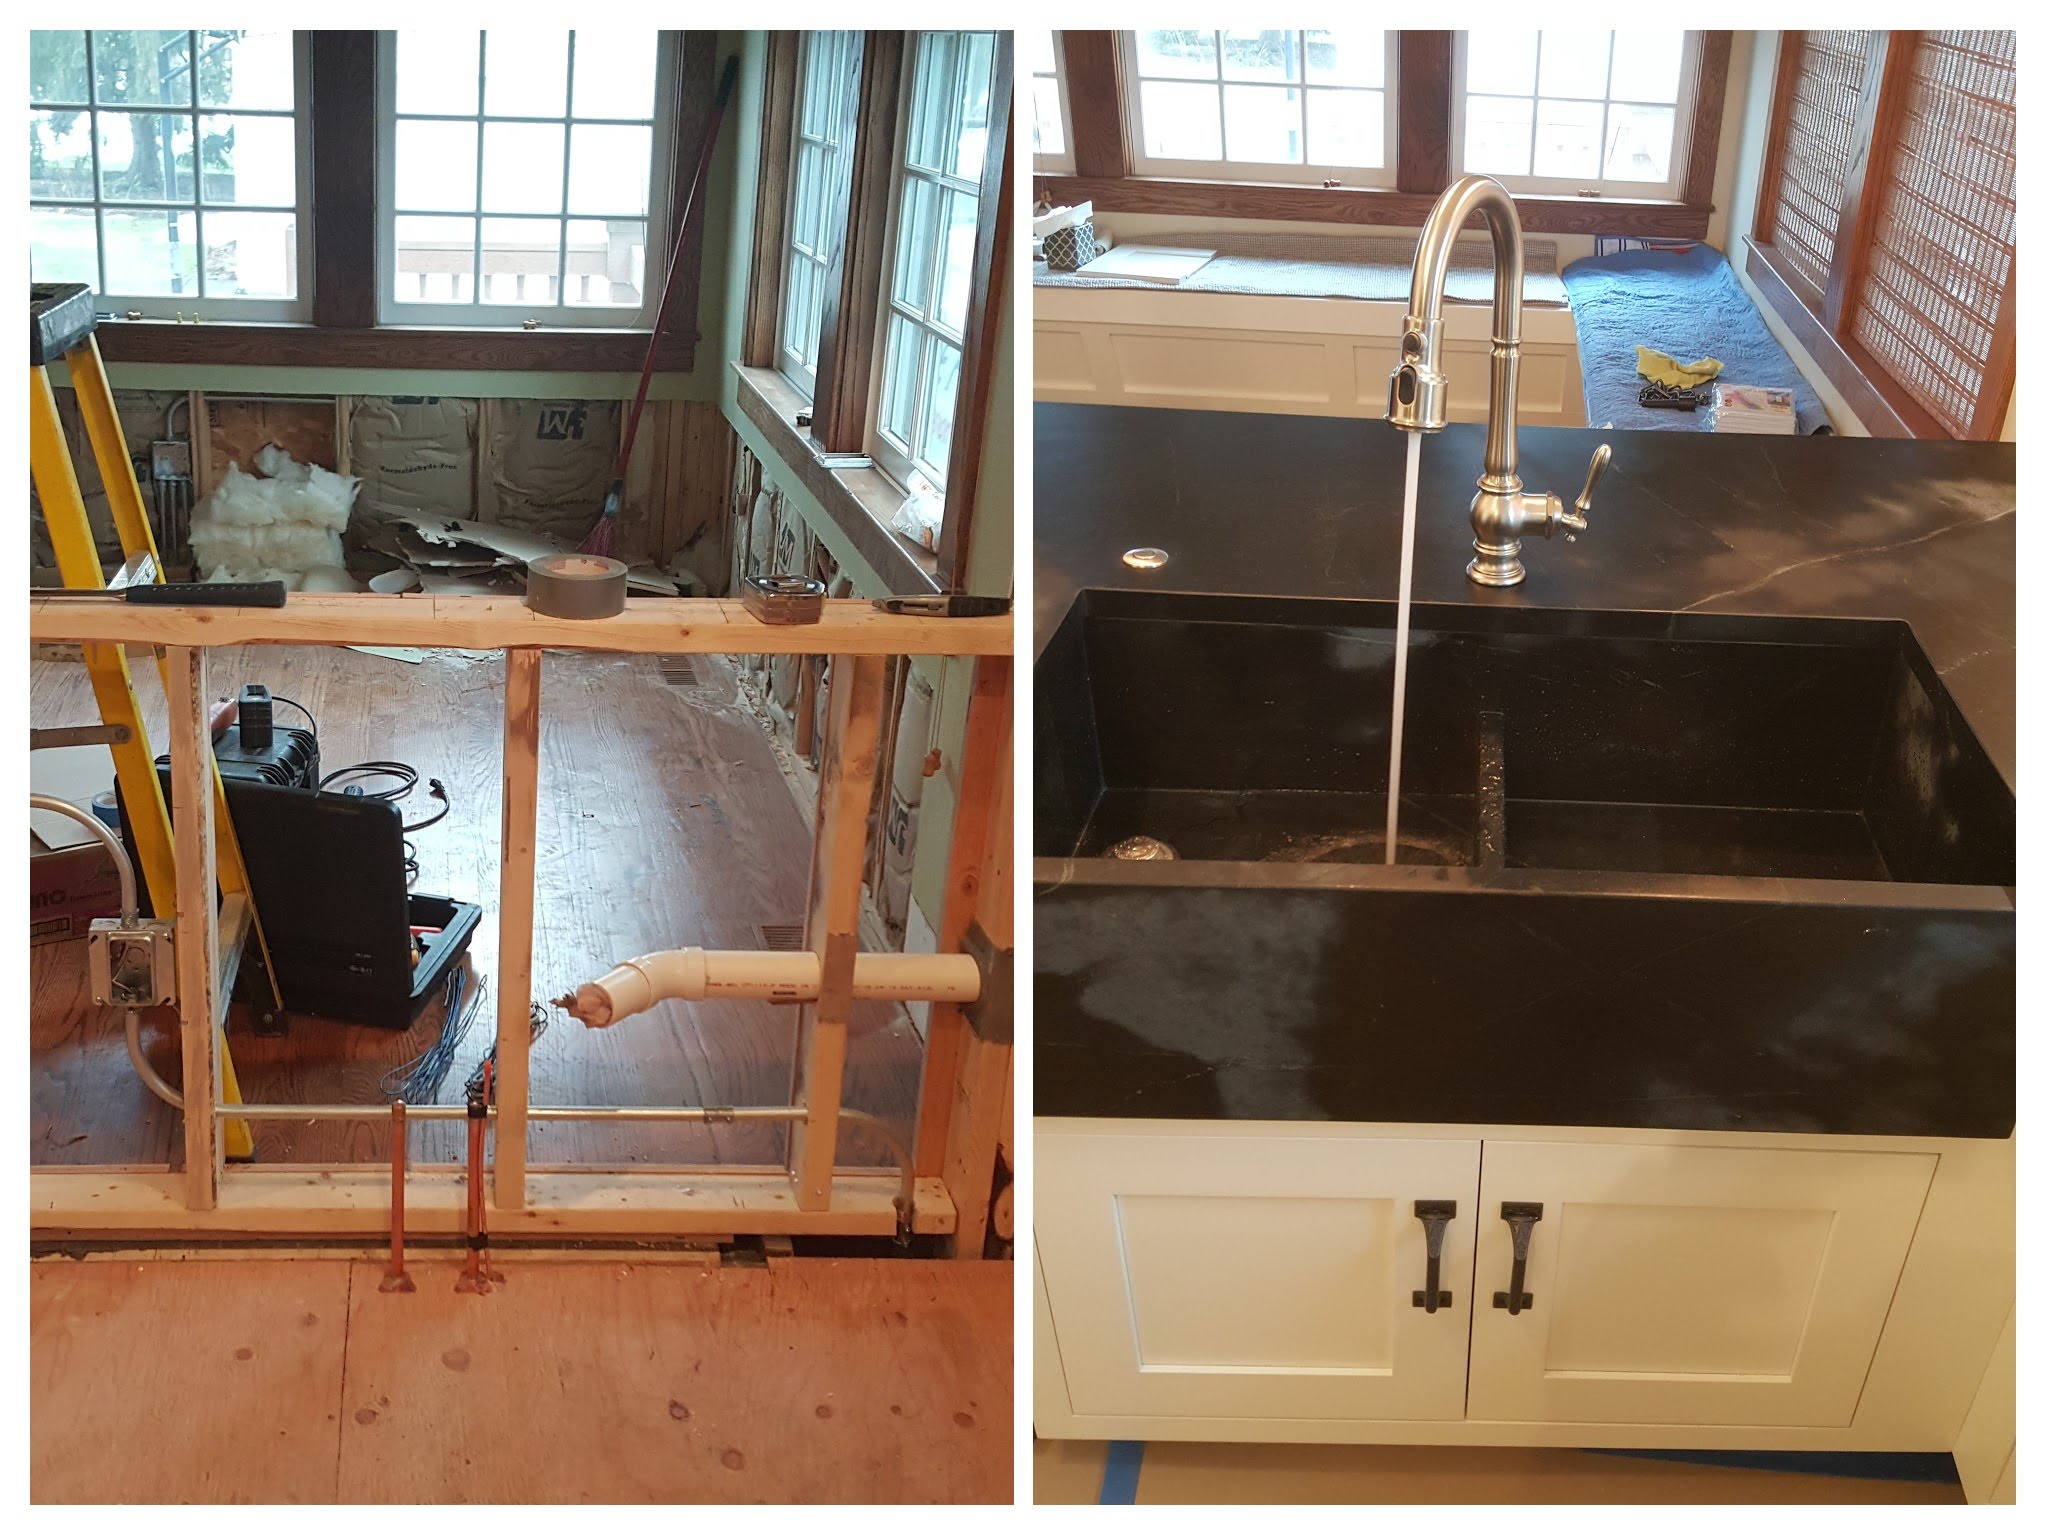 Remodeling kitchen sink of a farmhouse is one way of plumbing care